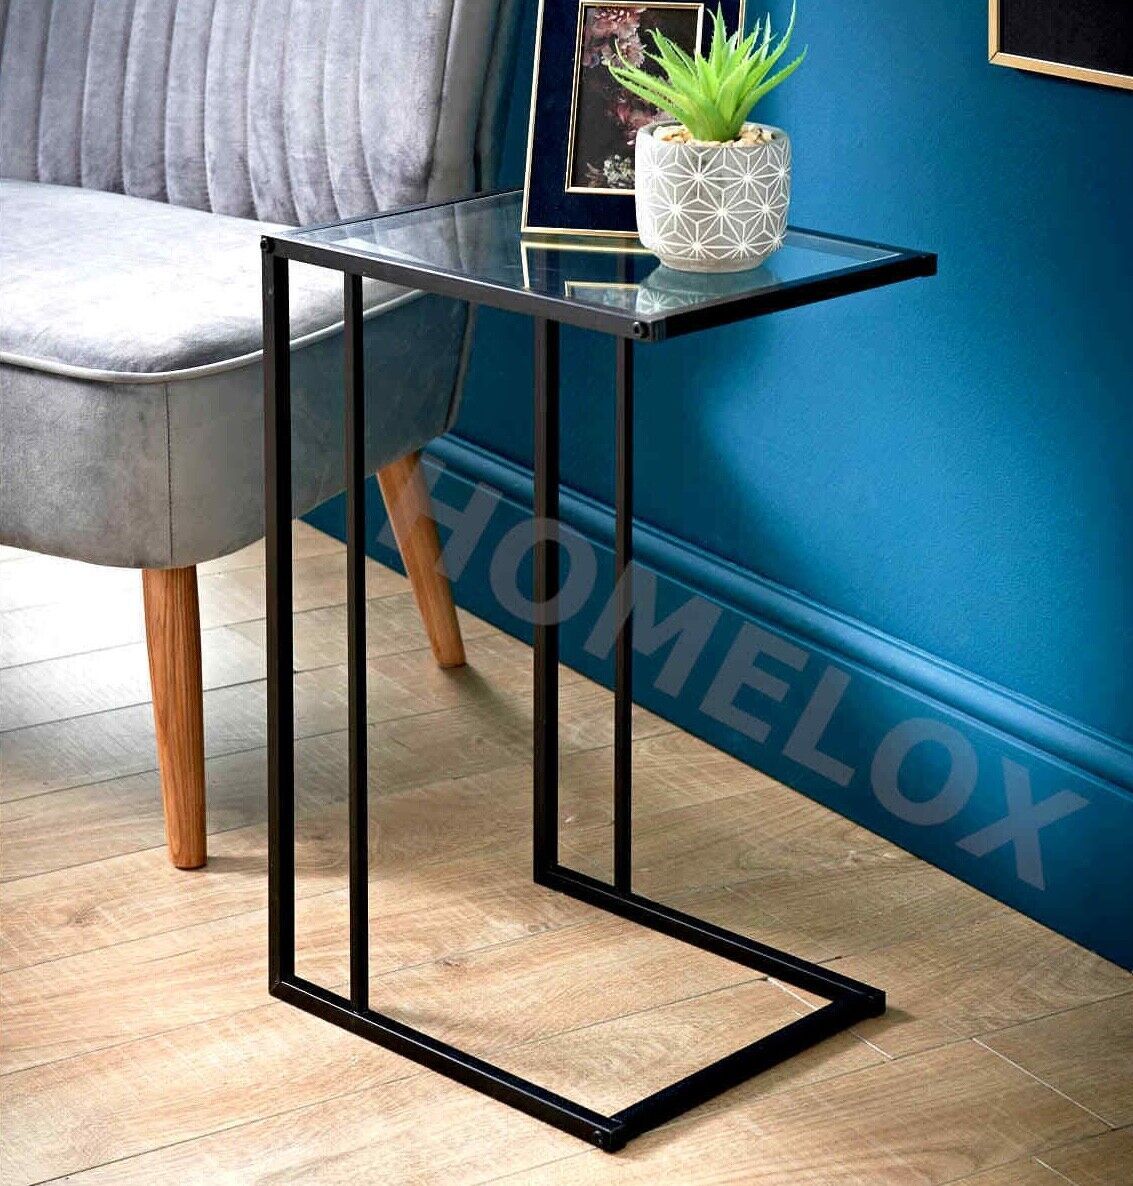 Sofa Side Table Black With Clear Glass Top Coffee End Table For Living Room  | Ebay With Regard To Transparent Side Tables For Living Rooms (View 3 of 15)